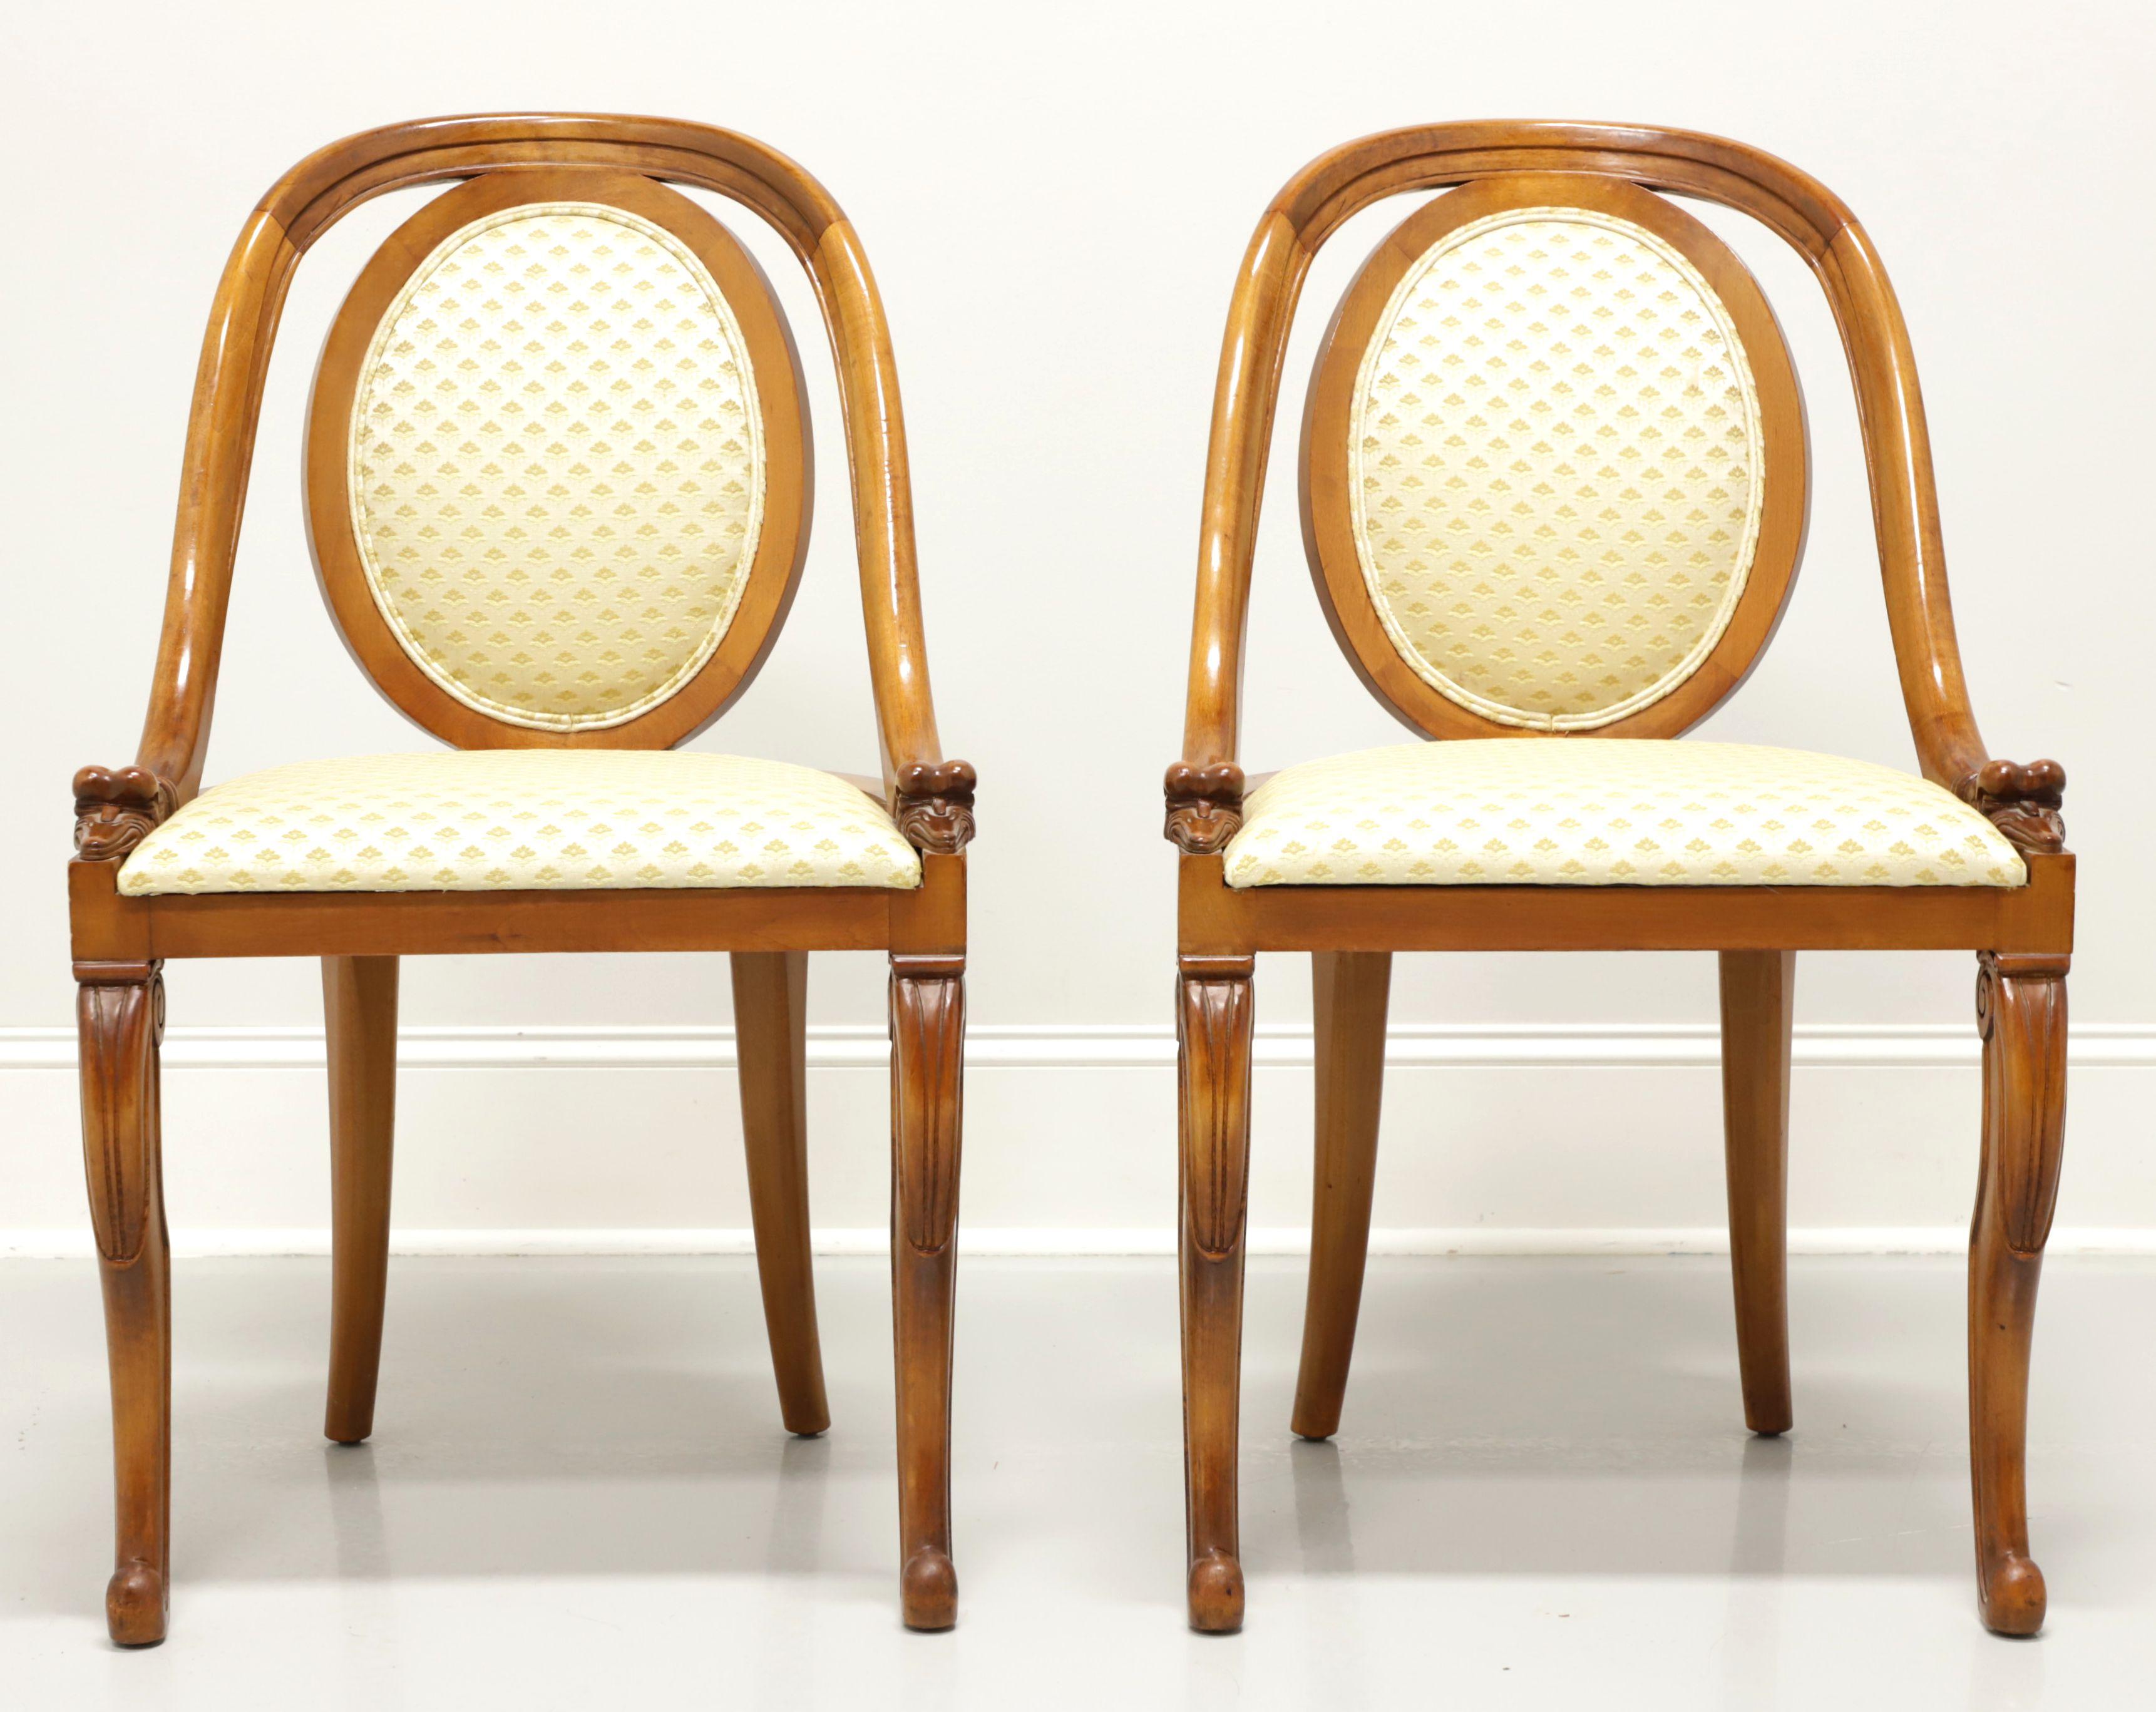 1920's French Art Deco Goosehead Dining Chairs - Pair D In Good Condition For Sale In Charlotte, NC